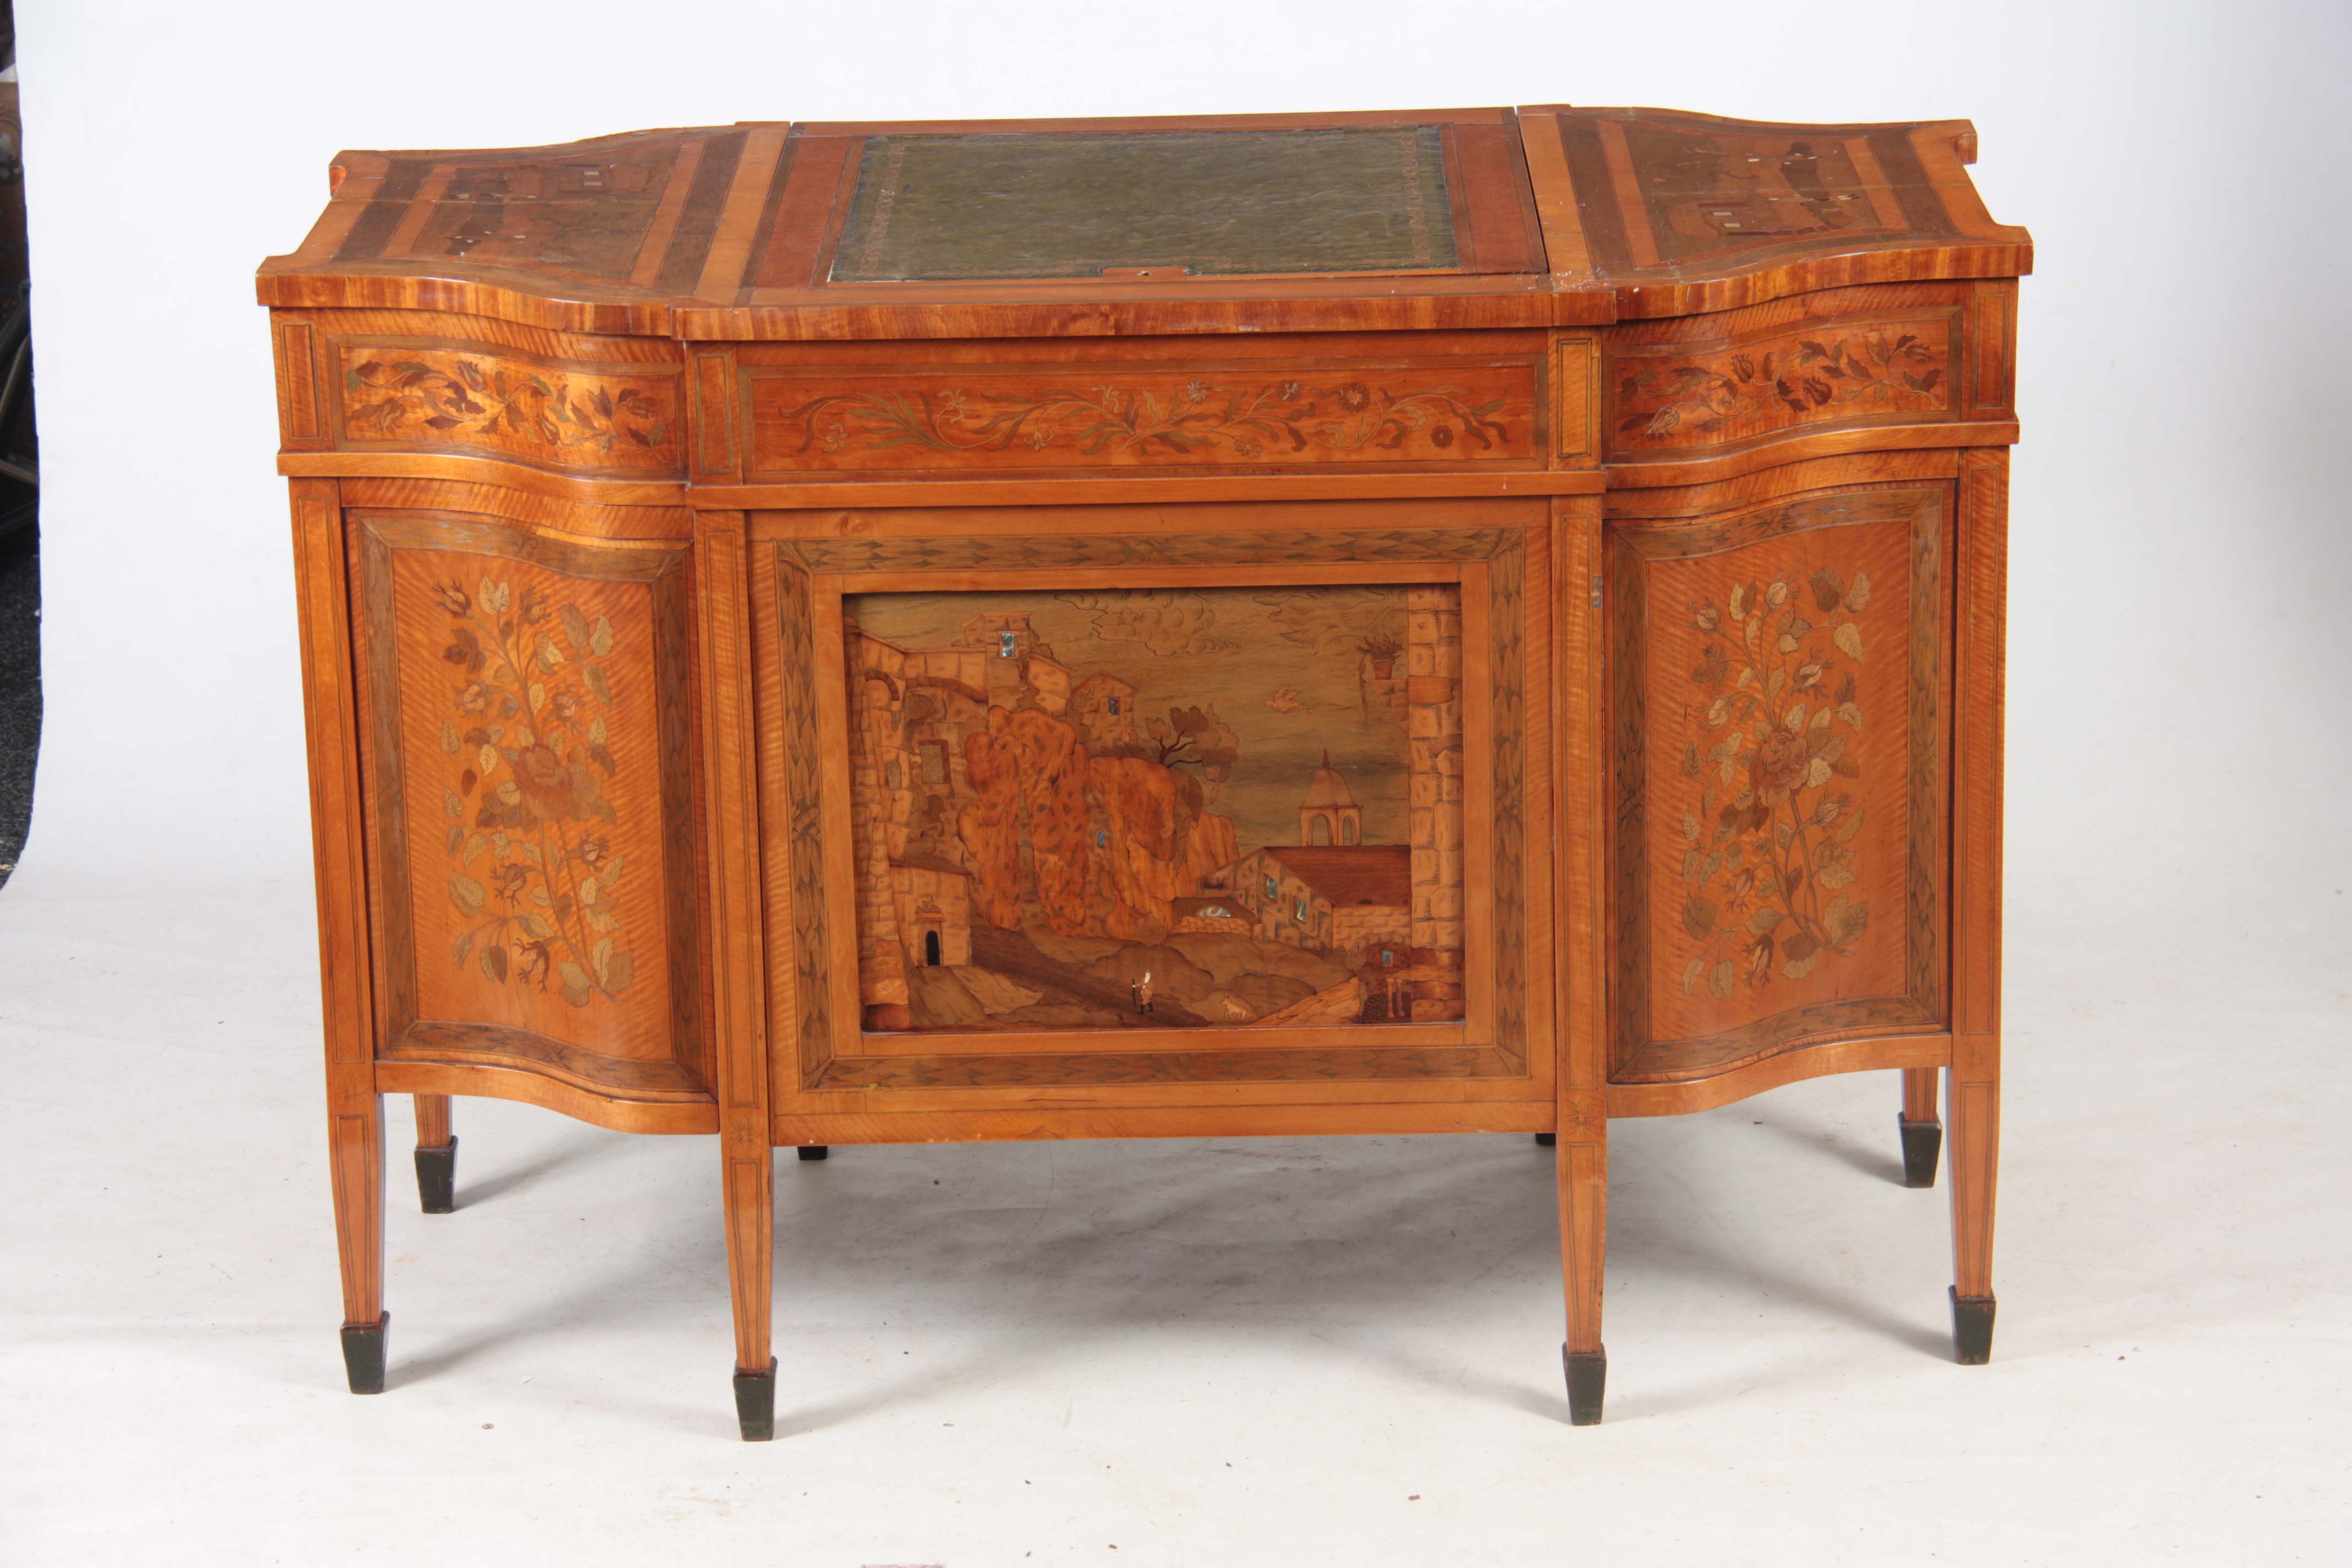 AN UNUSUAL FREESTANDING VICTORIAN SATINWOOD INLAID DESK with floral inlaid serpentine drawers to the - Image 7 of 8